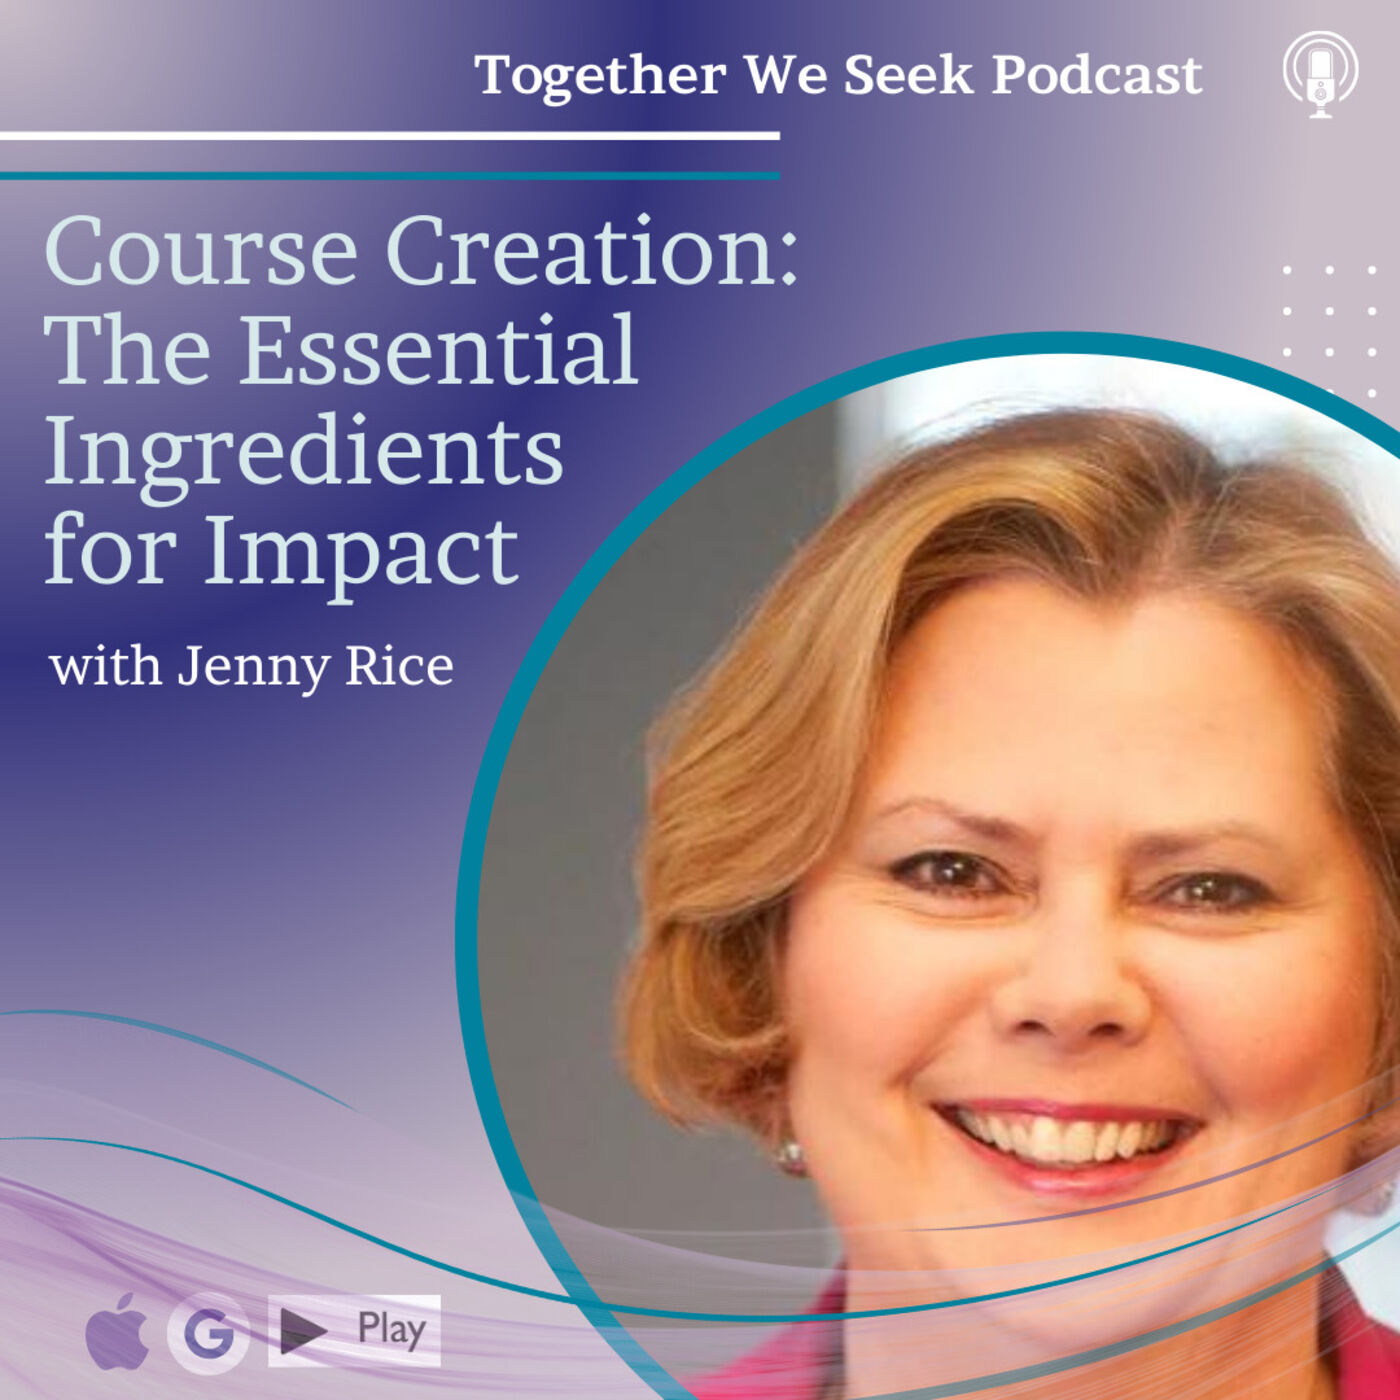 Course Creation: The Essential Ingredients for Impact with Jenny Rice